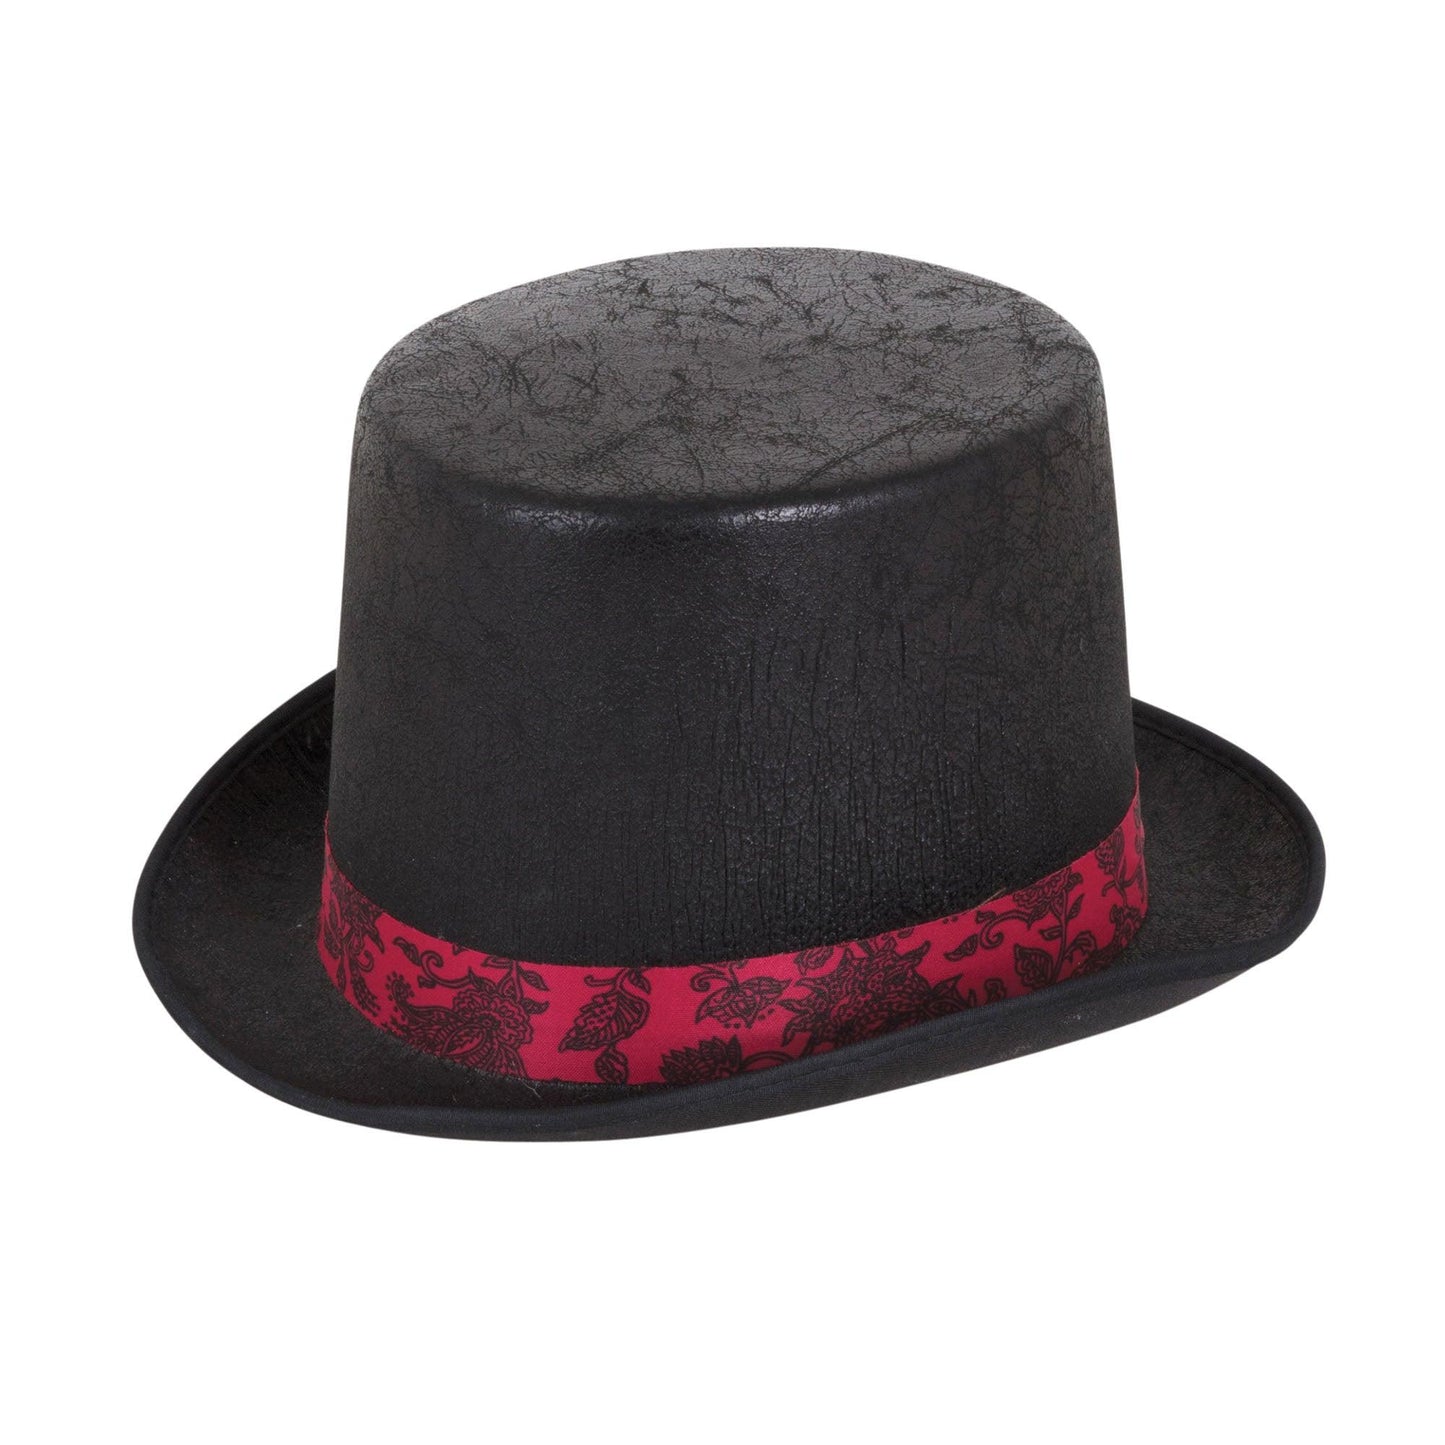 Top Hat ‘Aged’ Look Black with Red Band - Labreeze